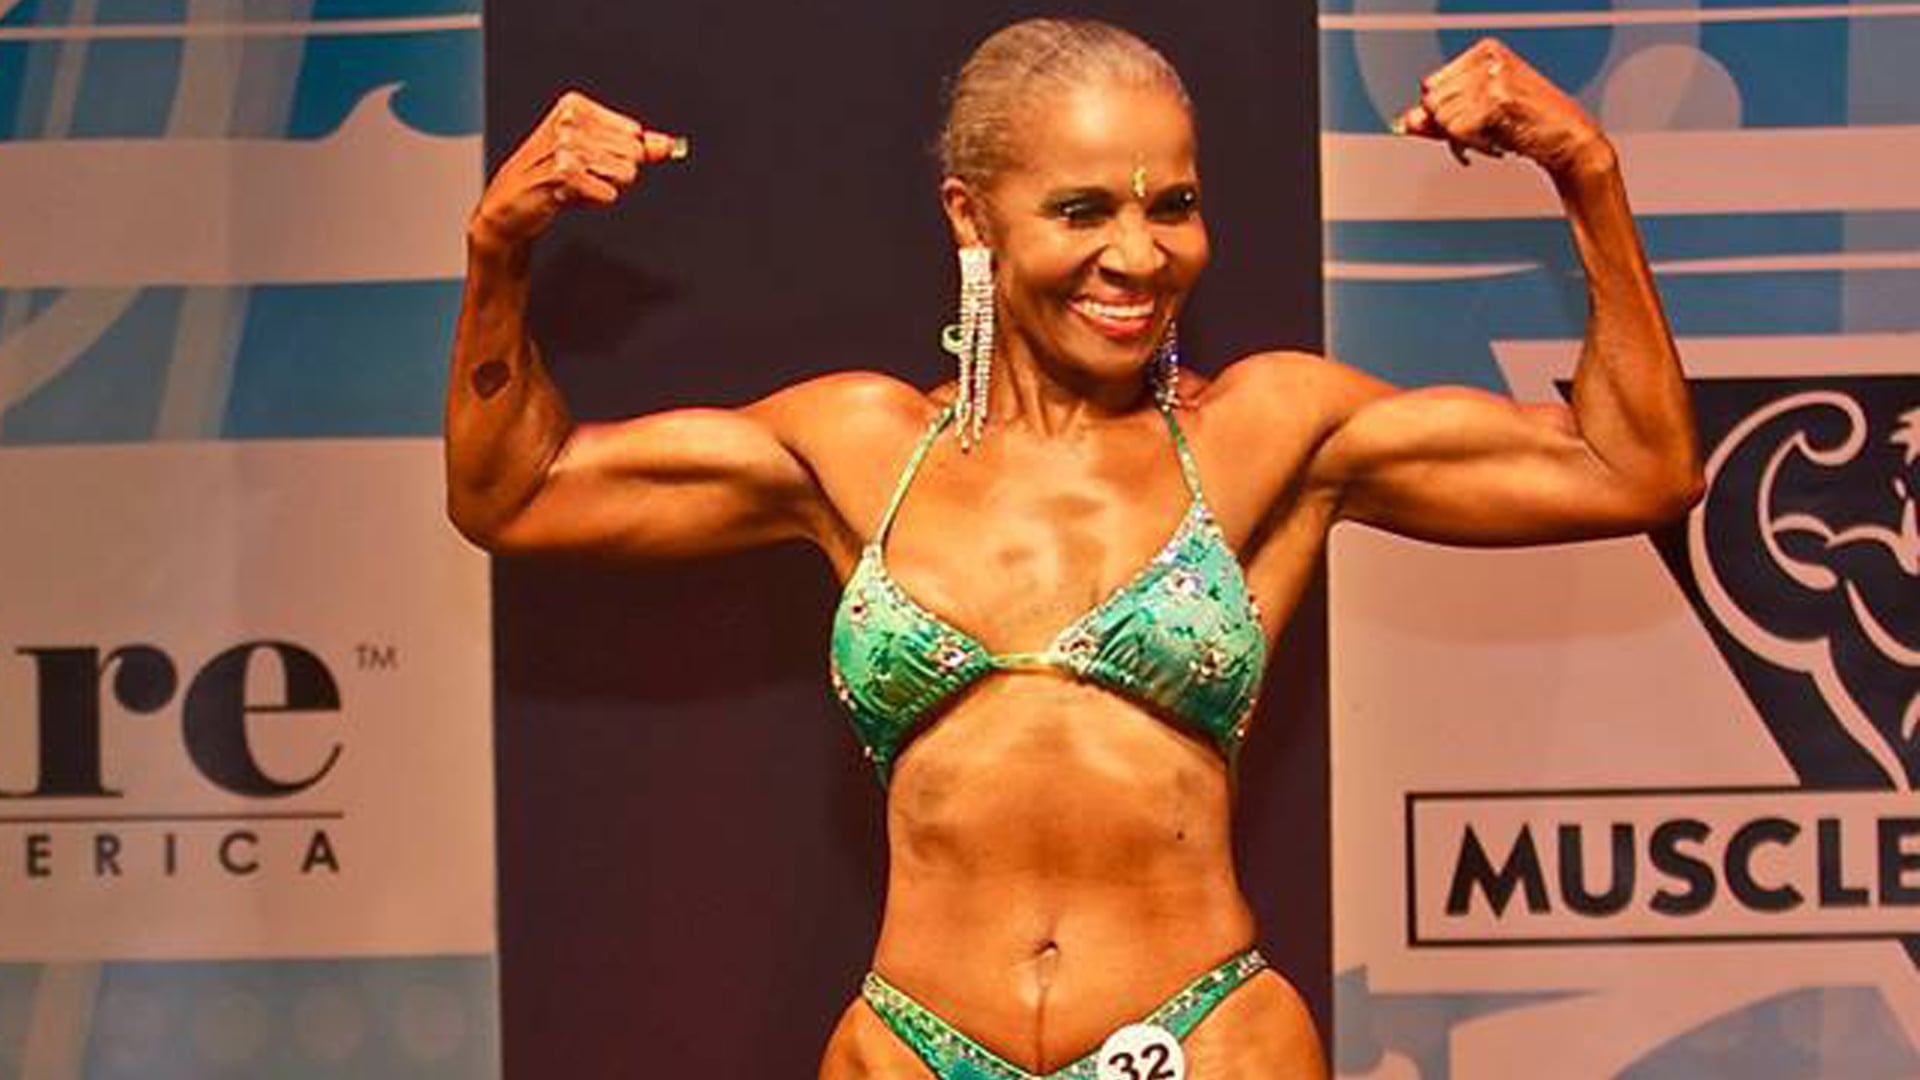 World's Fittest Grandma Body Builder Just Celebrated Her 80th